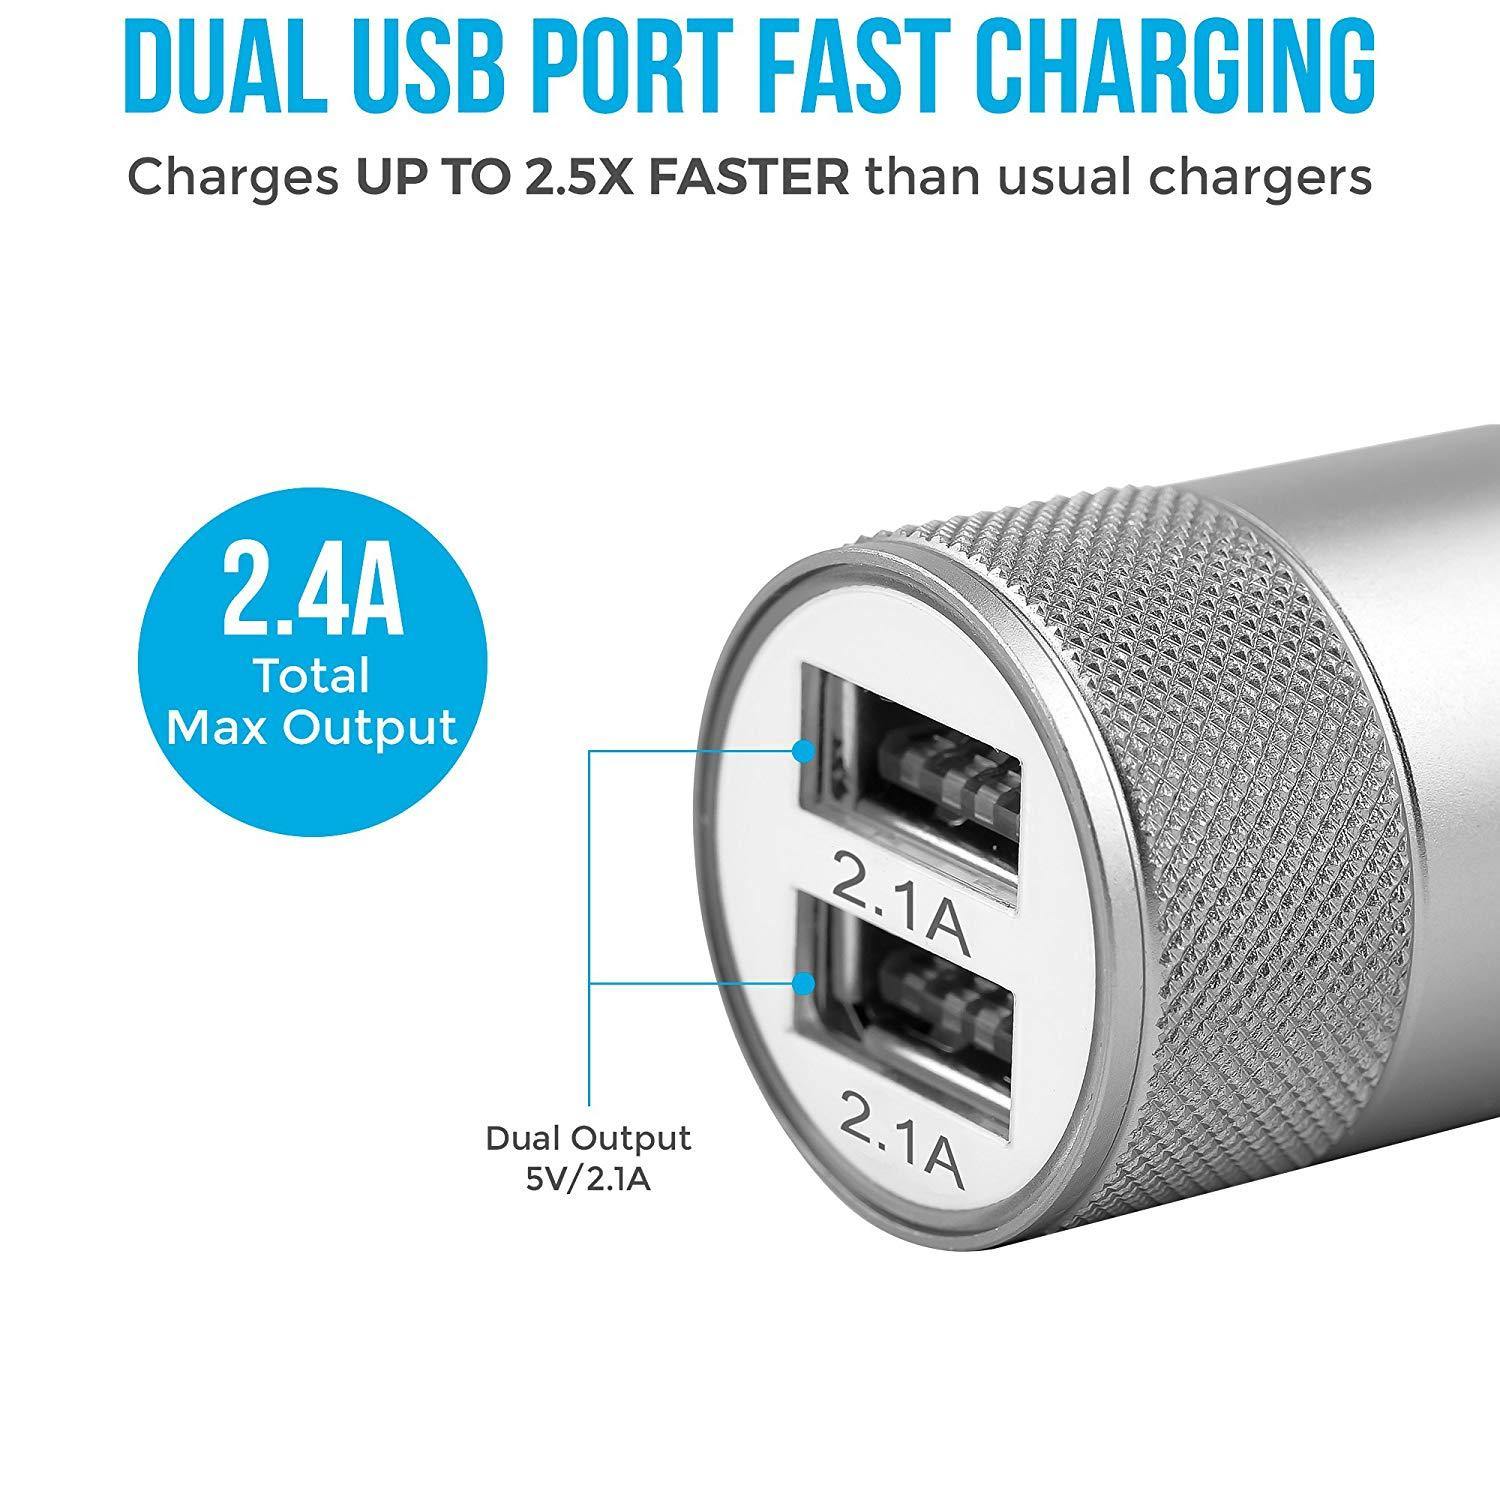 ACC-74-M Dual Port Car Charger for All Smartphones (Black & Silver) - AmbraneIndia